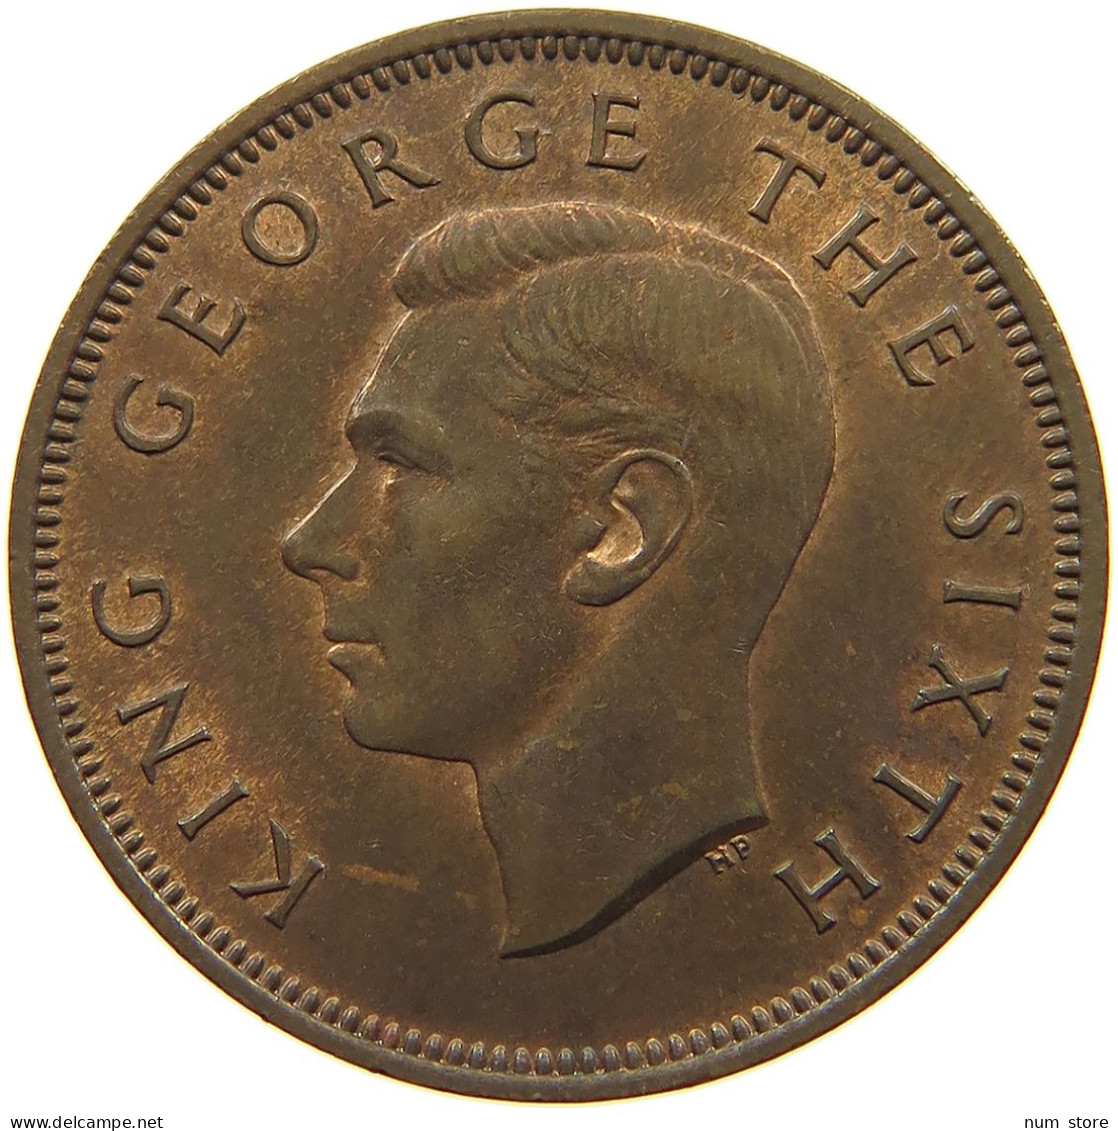 NEW ZEALAND 1/2 PENNY 1952 George VI. (1936-1952) #a094 0749 - New Zealand